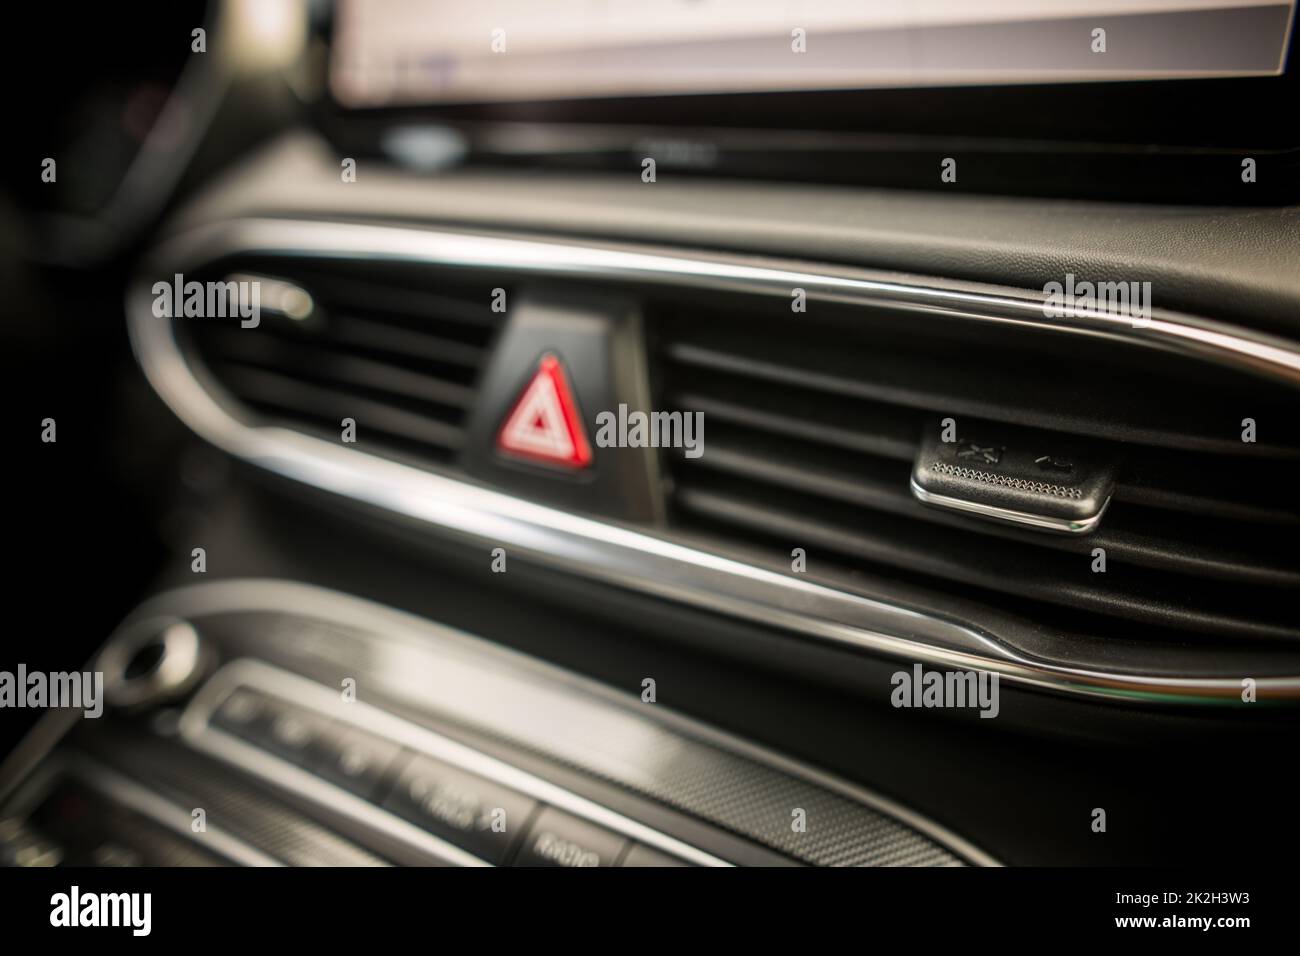 Close up shot of a modern car air vents on the dashboard. Stock Photo